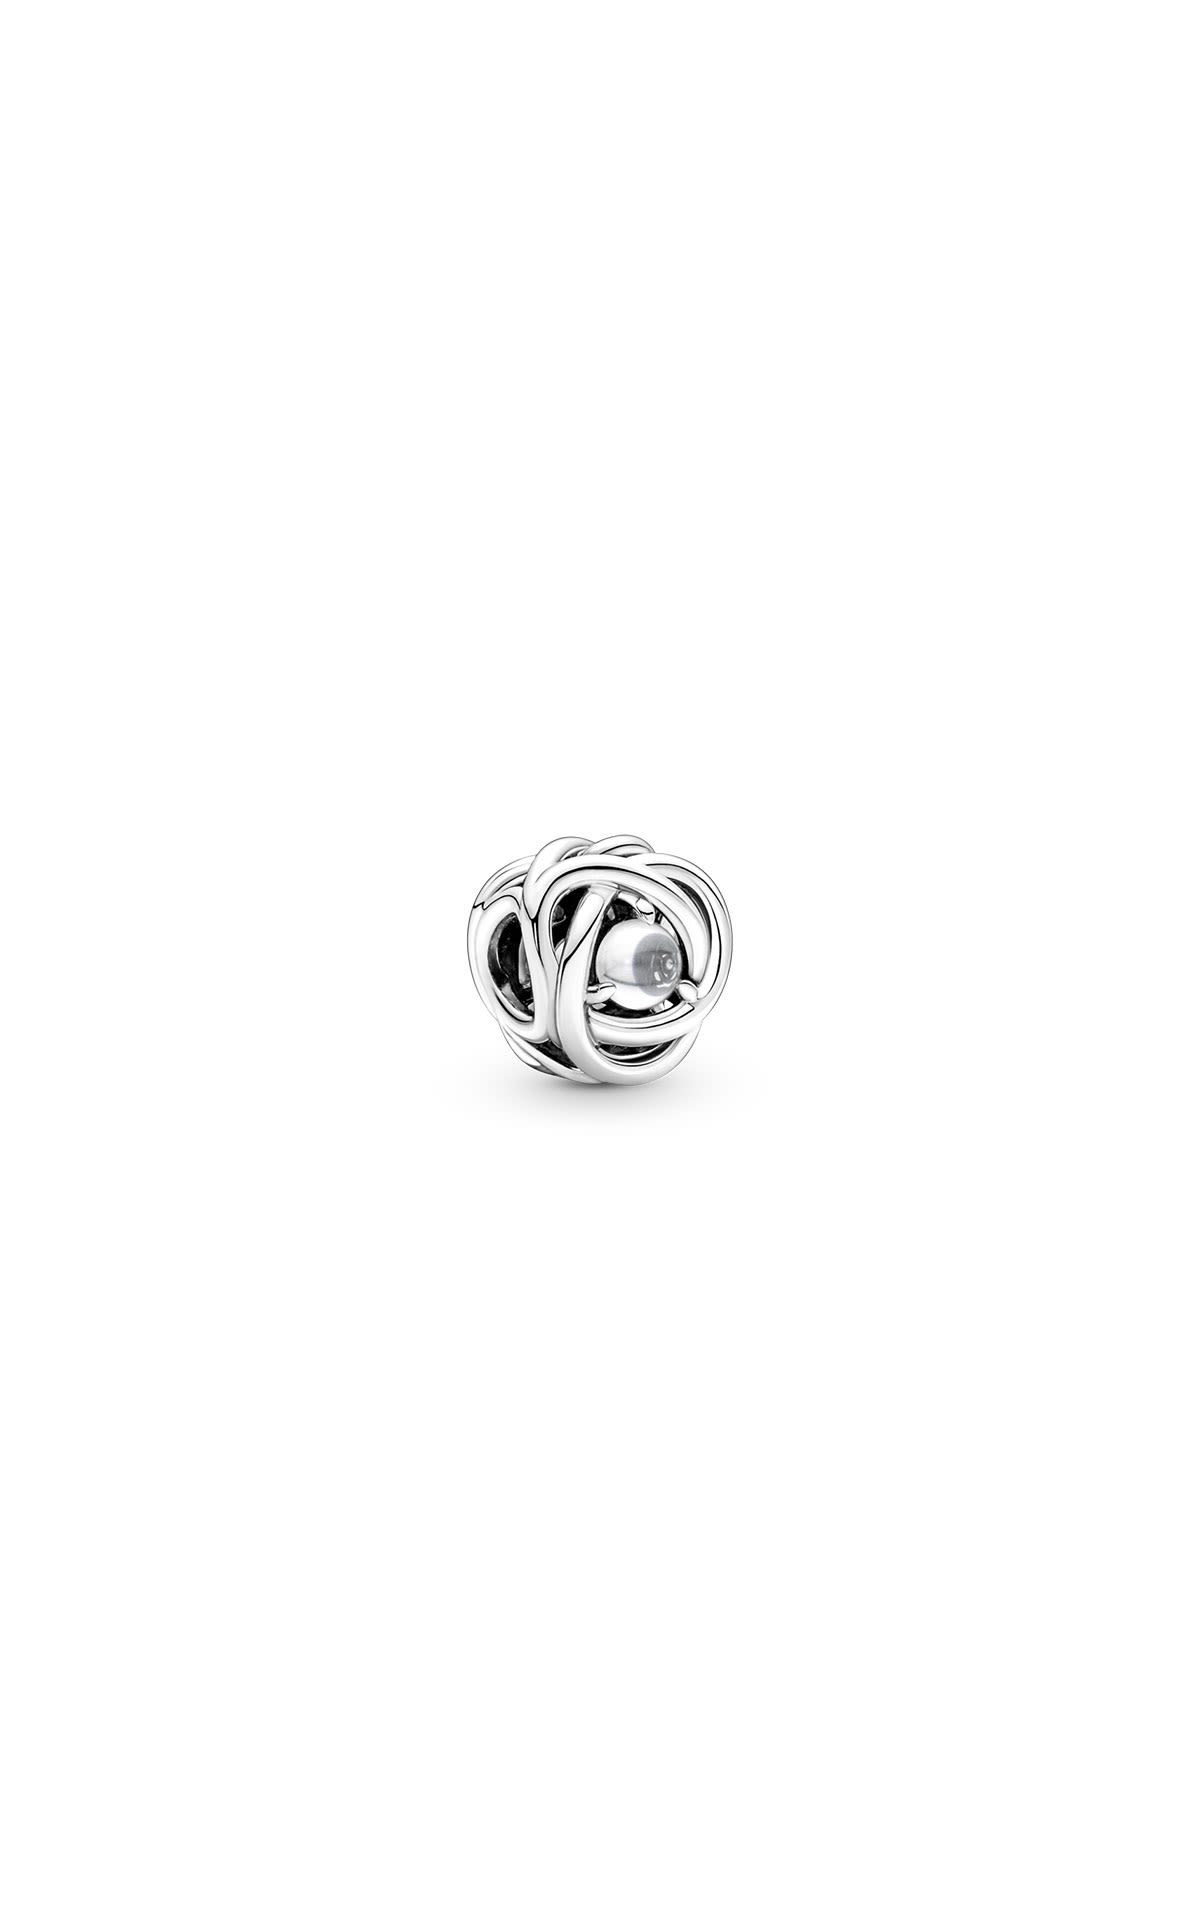 Pandora Sterling silver birthstone charm April clear cubic zirconia from Bicester Village